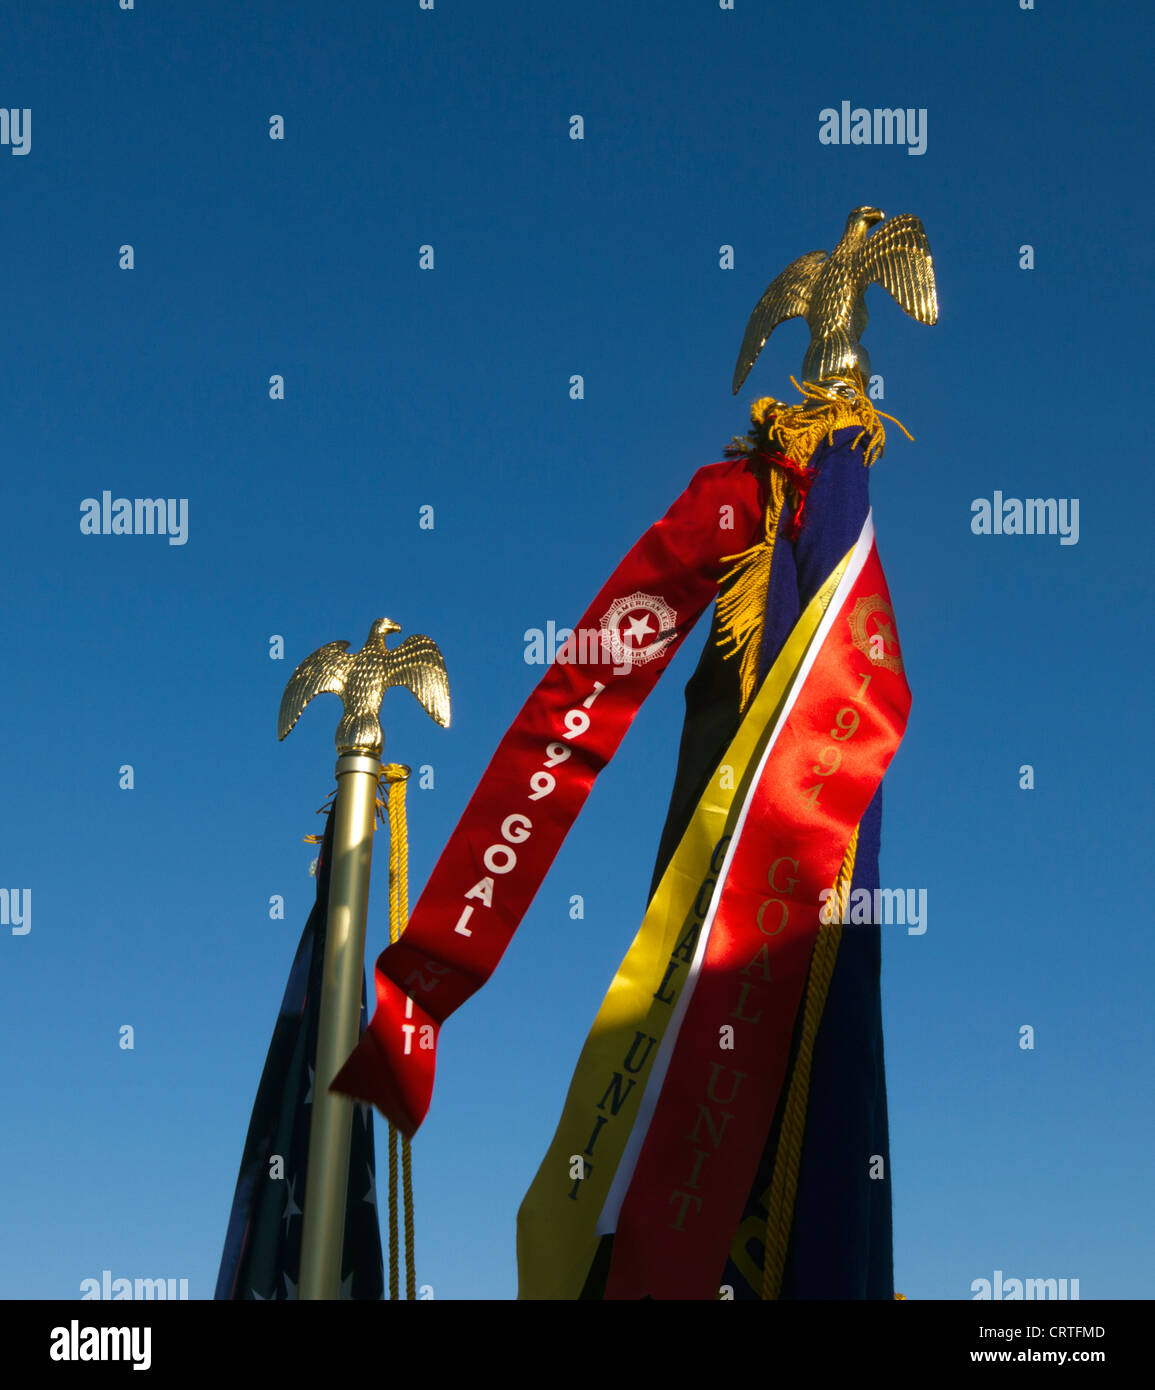 Flag poles, flags and ribbons. Stock Photo